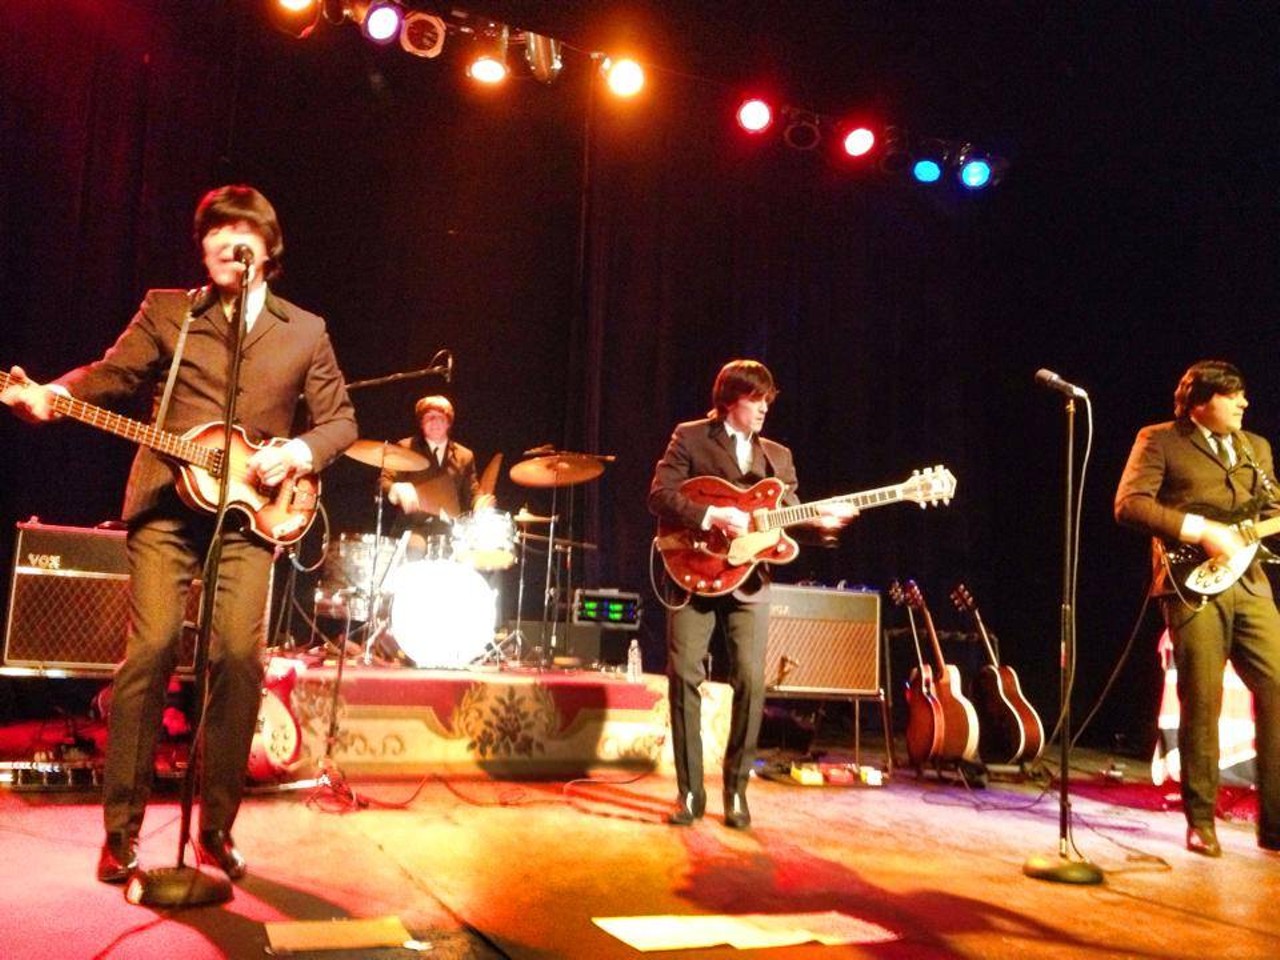 Enough with the seasonal music you say? Fine. Head down to Kent on February 7th and 8th for Beatlefest. The two-day celebration honors the 50th anniversary of the haircuts from England who came over to American and changed the music world. Plenty of cover bands and local acts are on the bill at various venues.